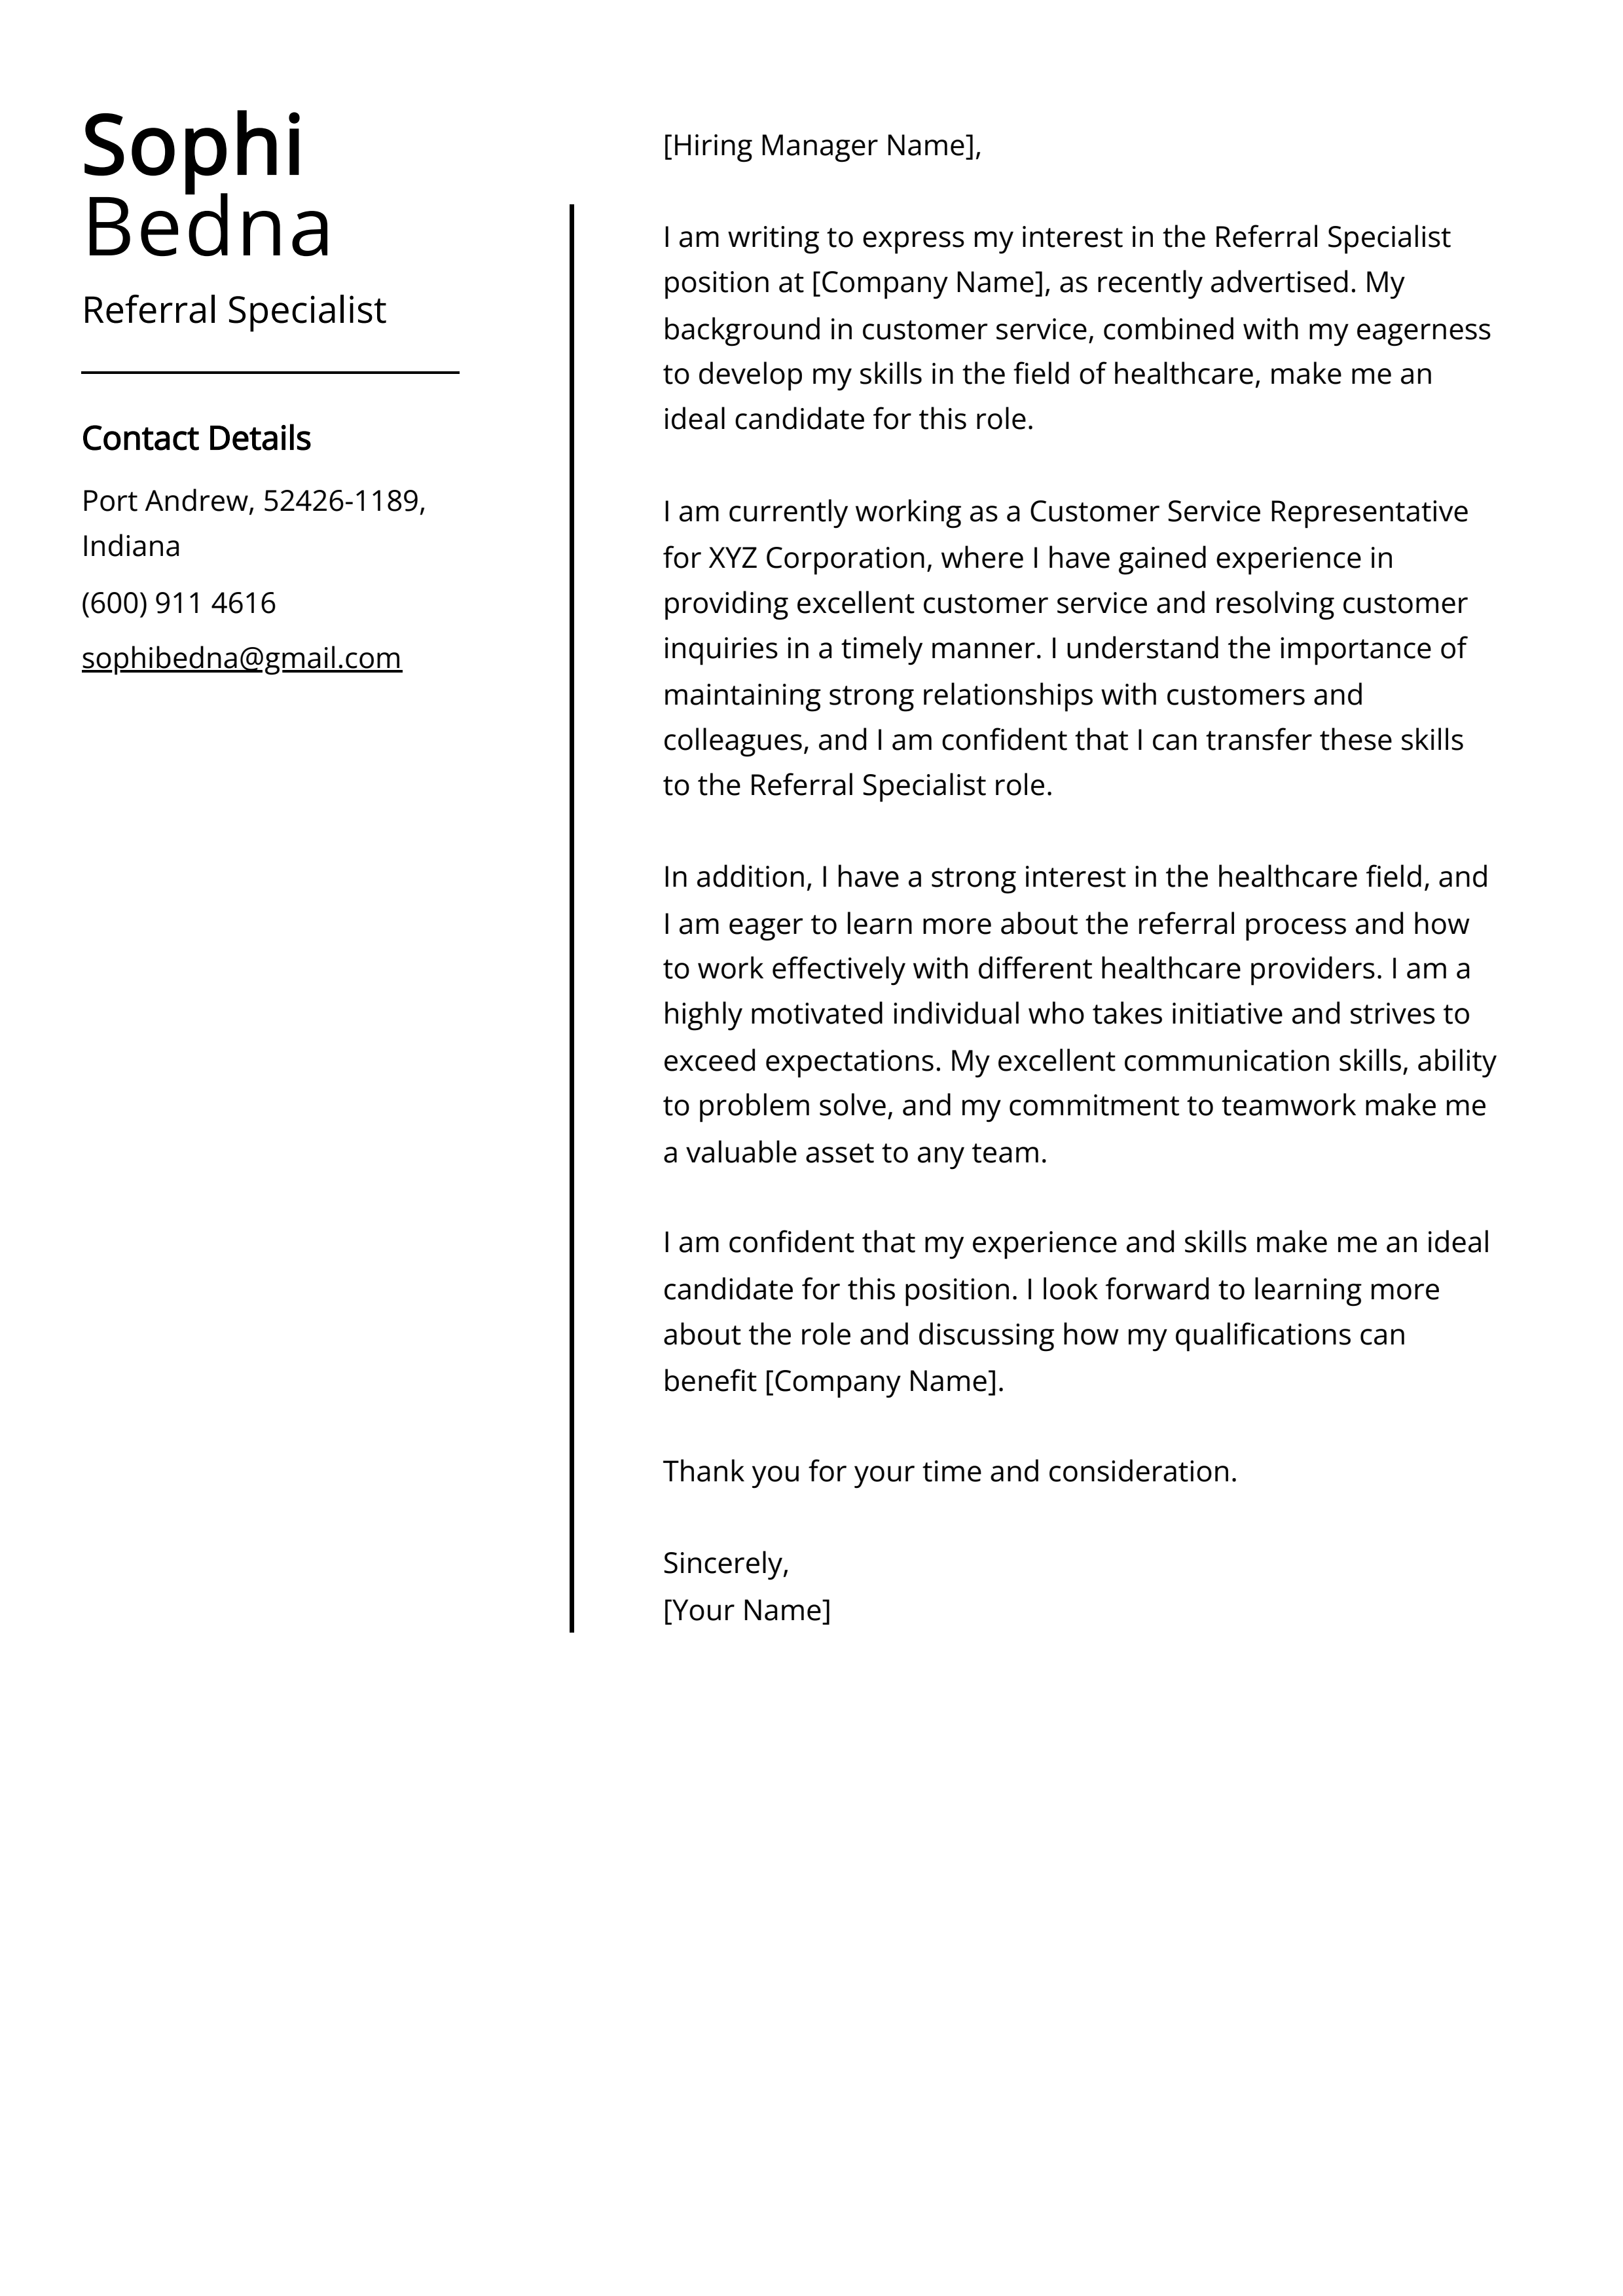 Referral Specialist Cover Letter Example